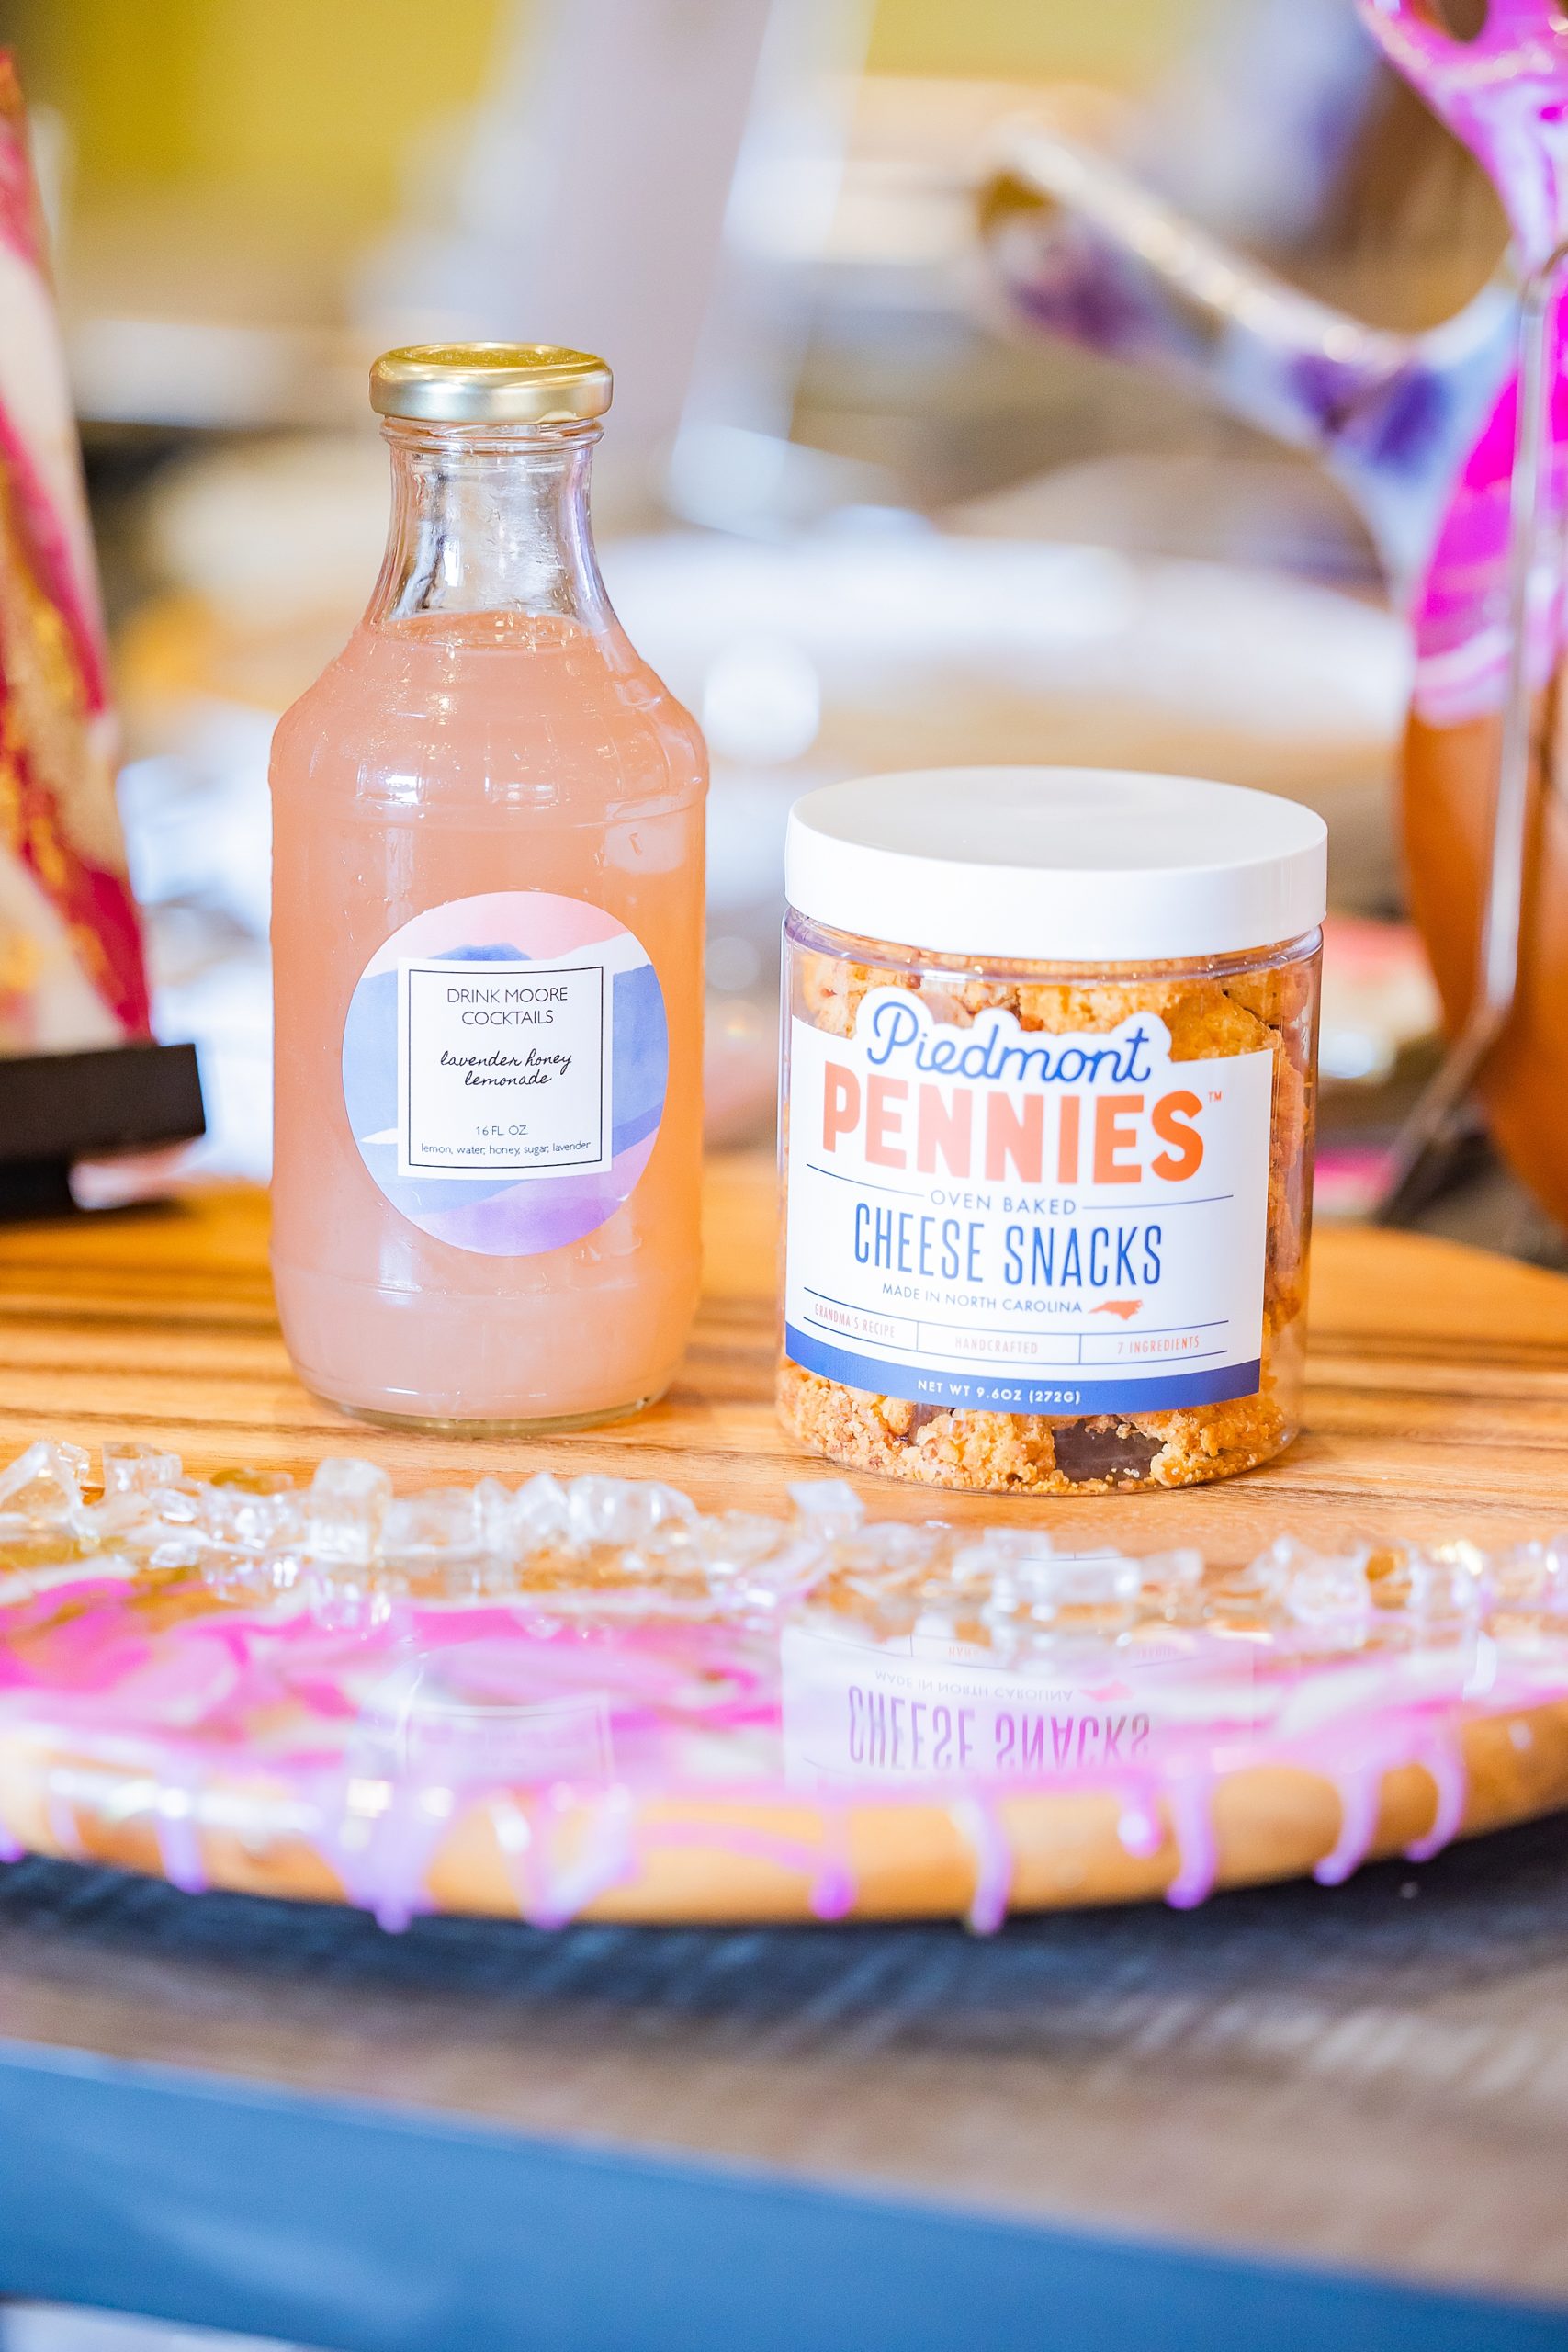 food from Piedmont Pennies on display at CLT Find Canopy Pop-Up Event